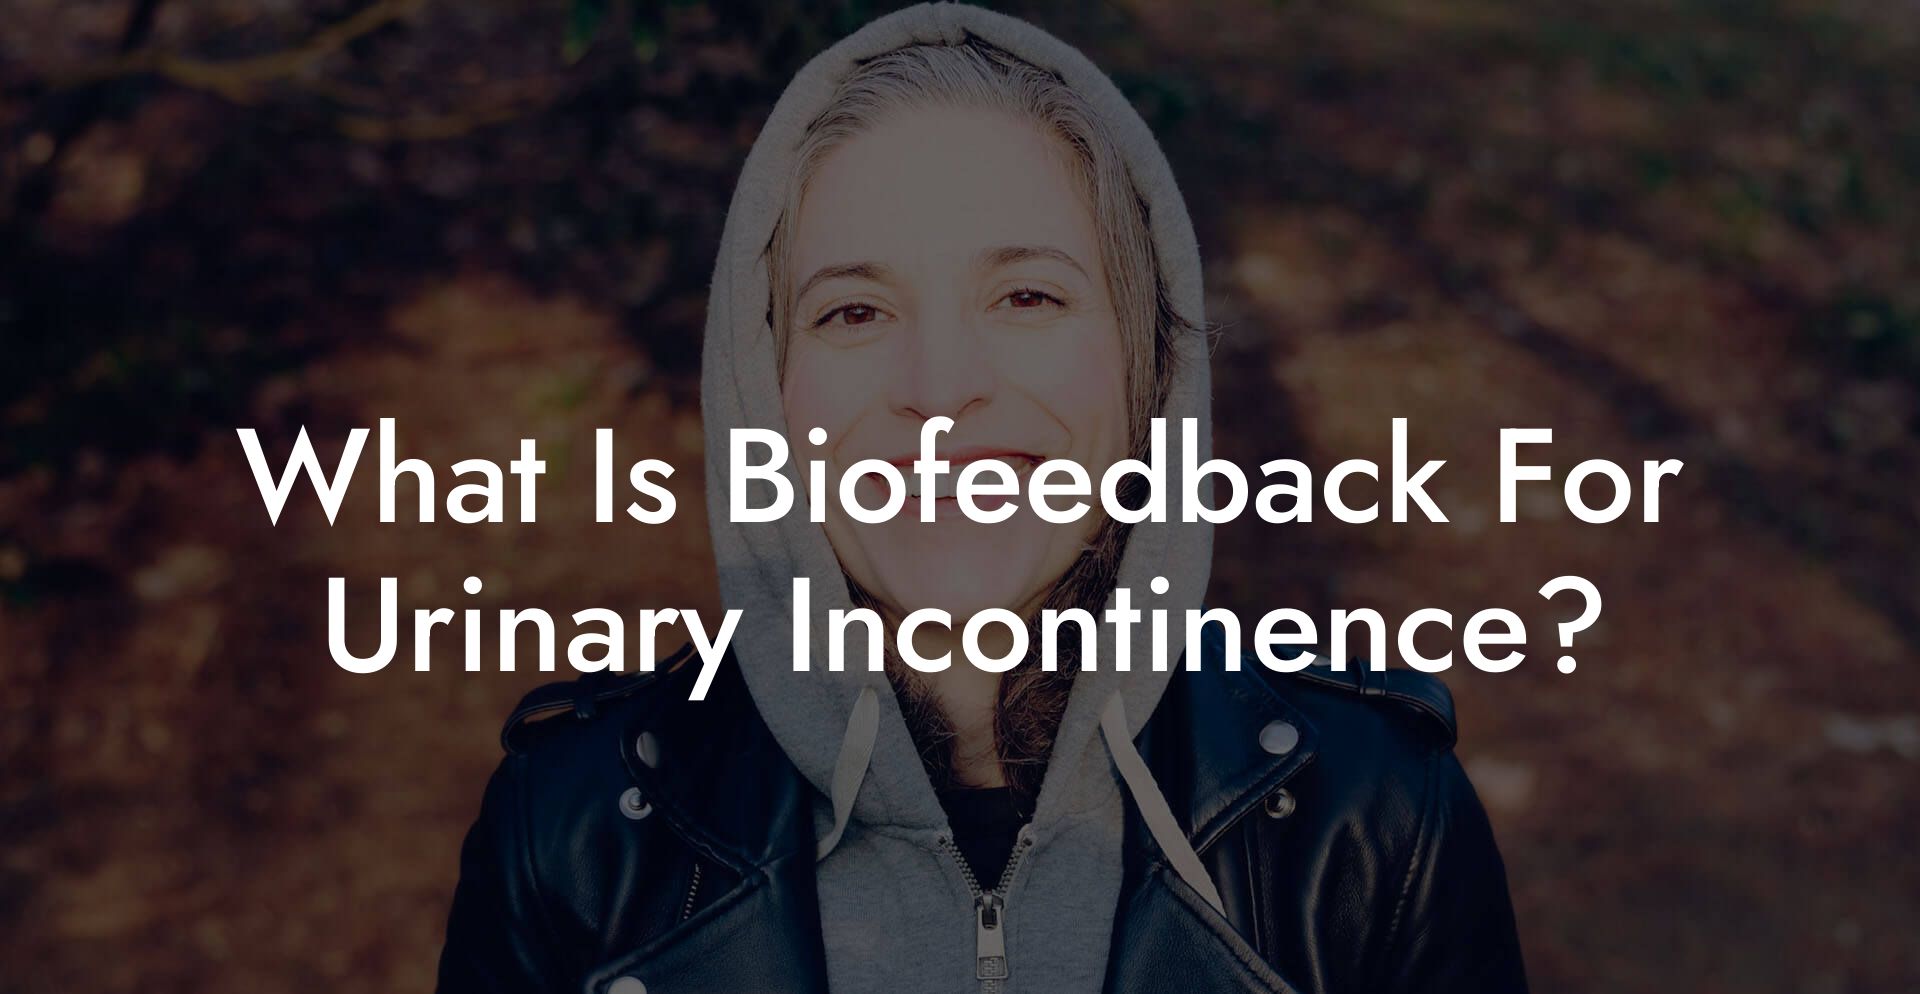 What Is Biofeedback For Urinary Incontinence?